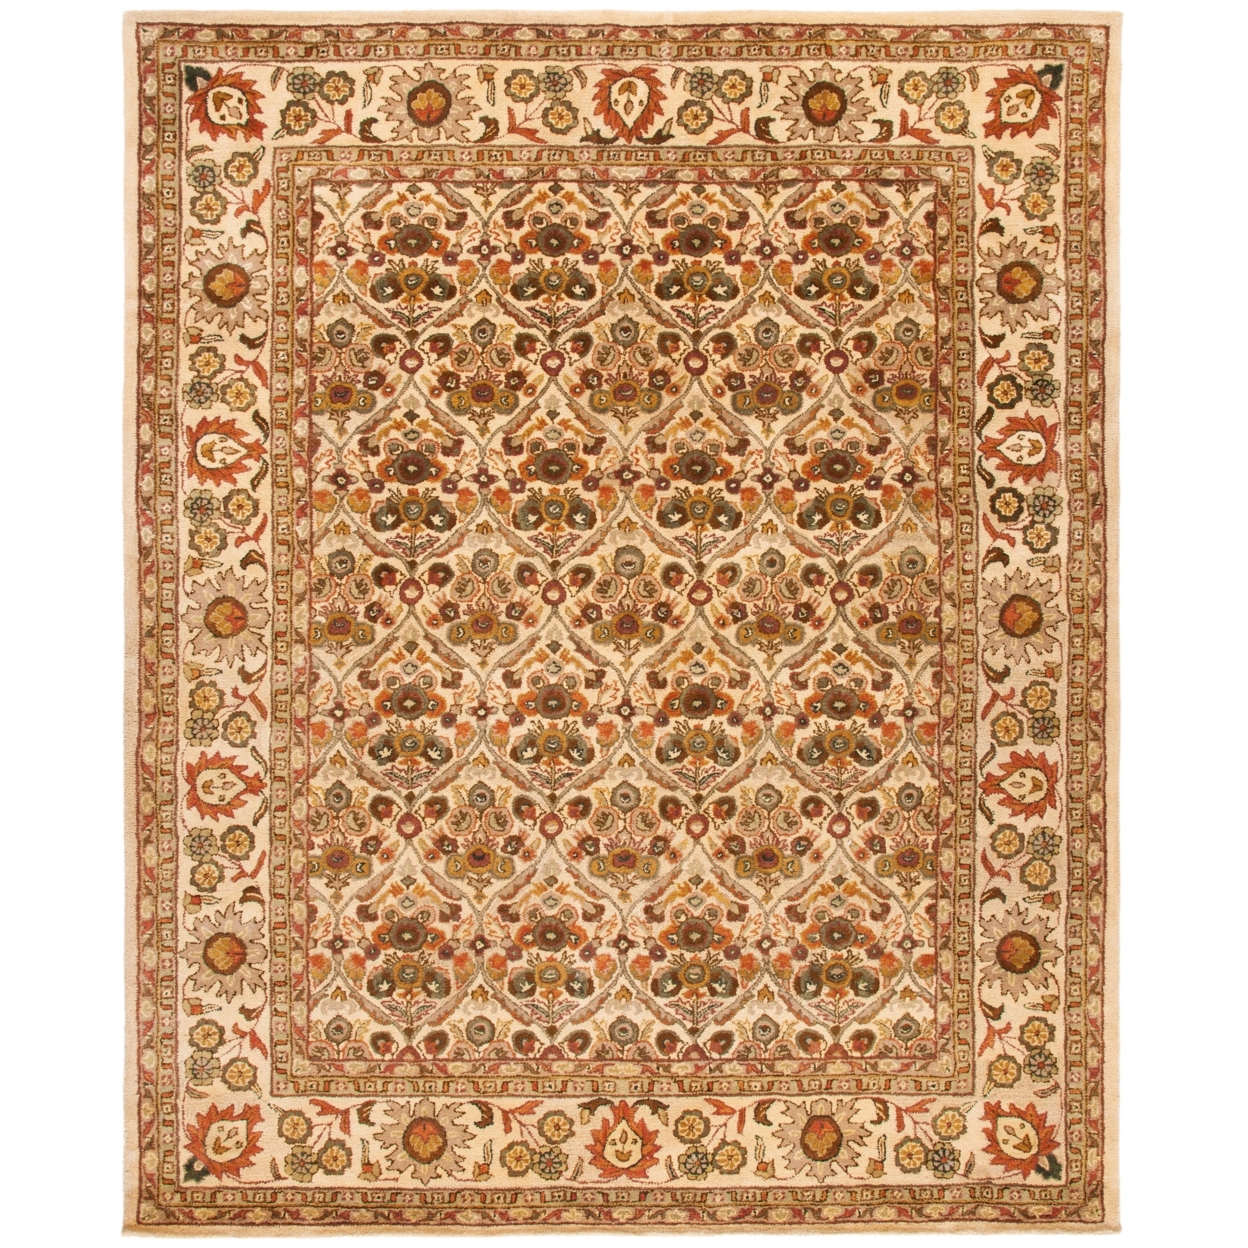 SAFAVIEH Antiquity Collection AT51C Handmade Gold Rug - 2' X 3'